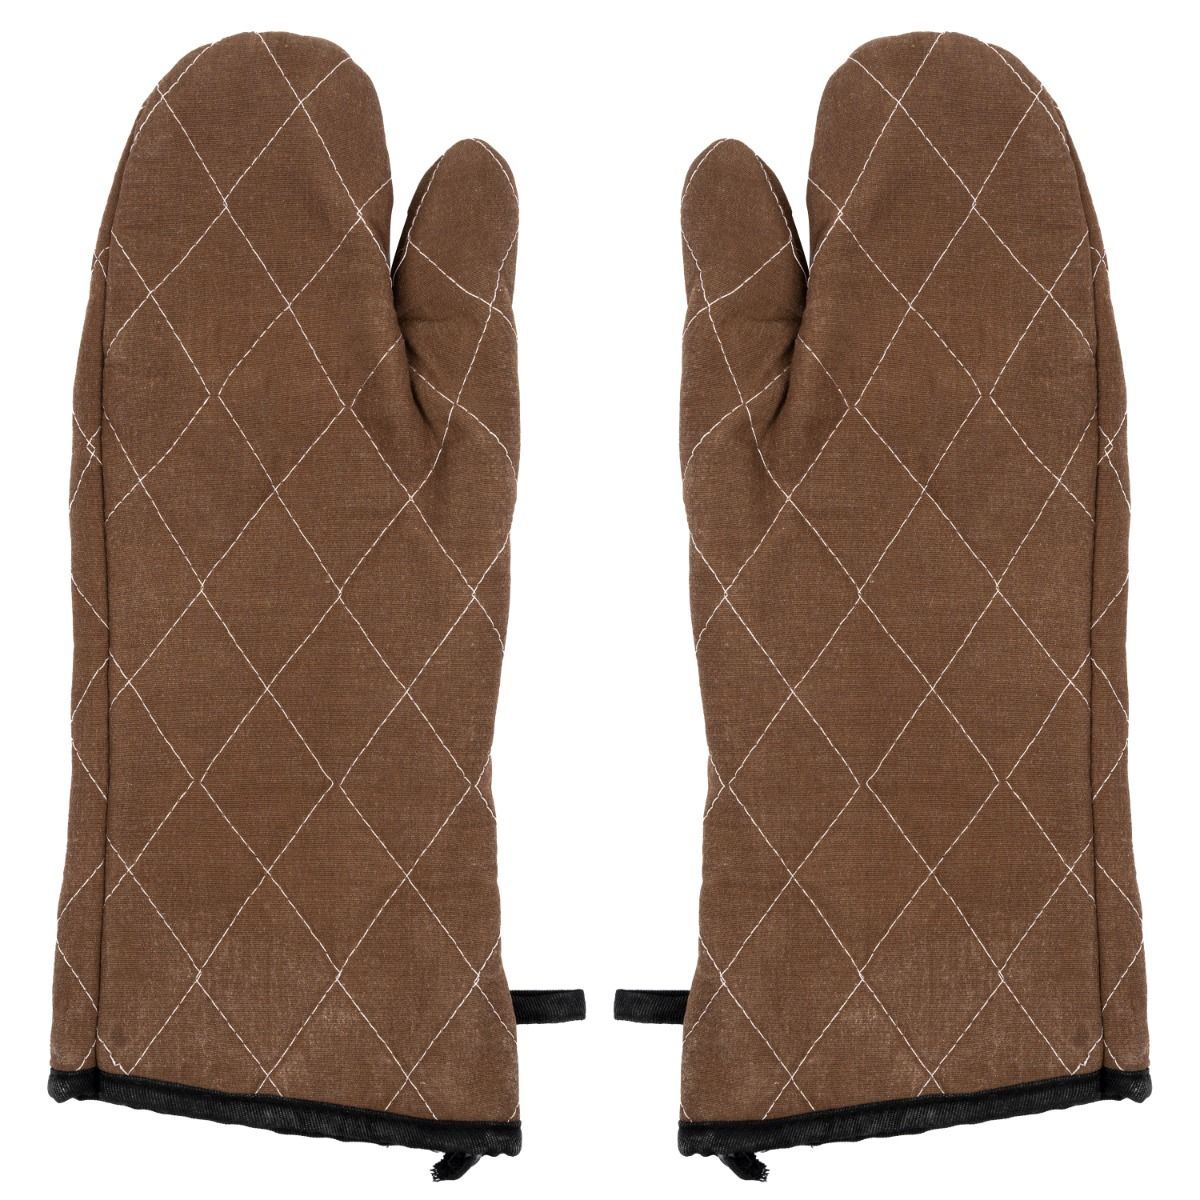 Ritz RITZ Food Service CL2PX10BETF-1 Professional Grade Flame-Resistant  24-Inch Pyrotex Oven Mitt, Set of 2, Beige